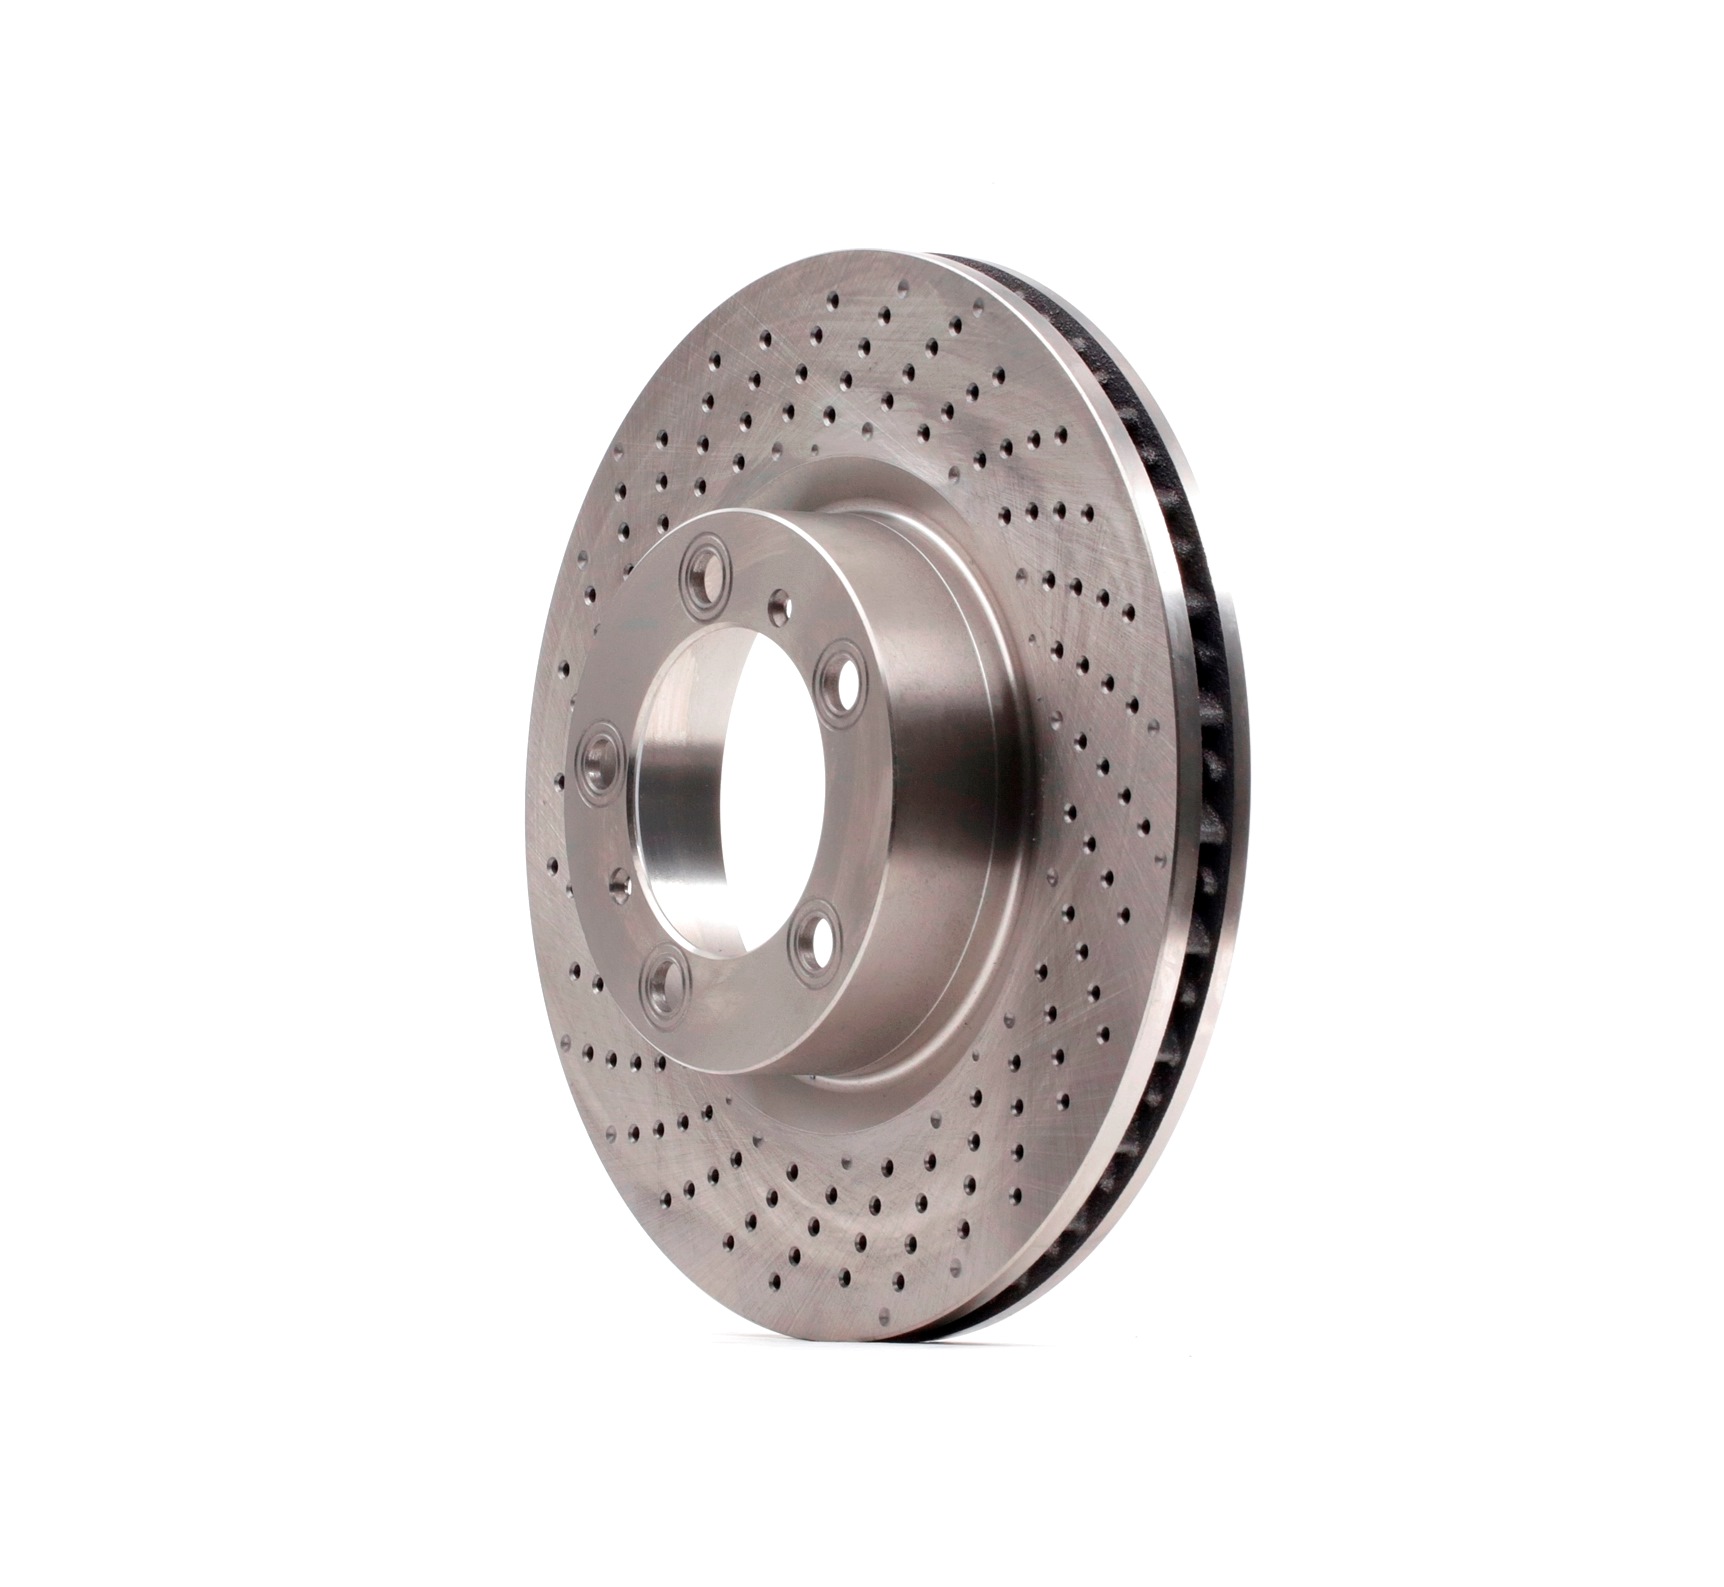 SKBD-0023426 STARK Brake rotors PORSCHE Front Axle Left, 330x28mm, 05/07x130, perforated/vented